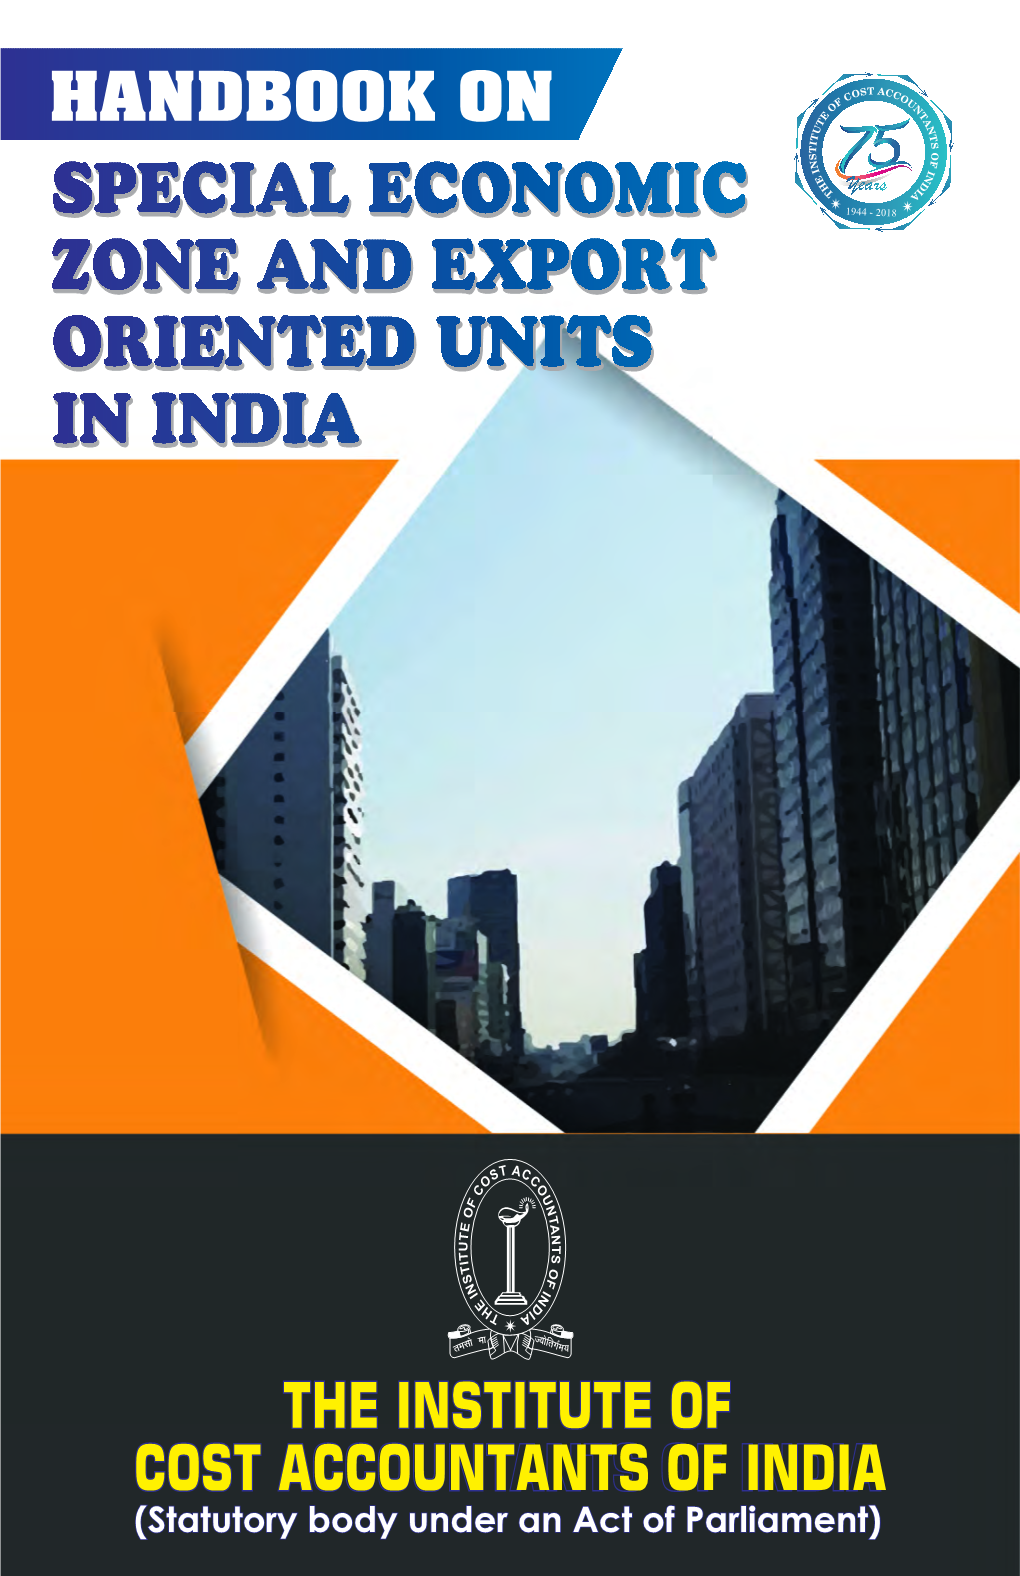 Special Economic Zone and Export Oriented Units in India